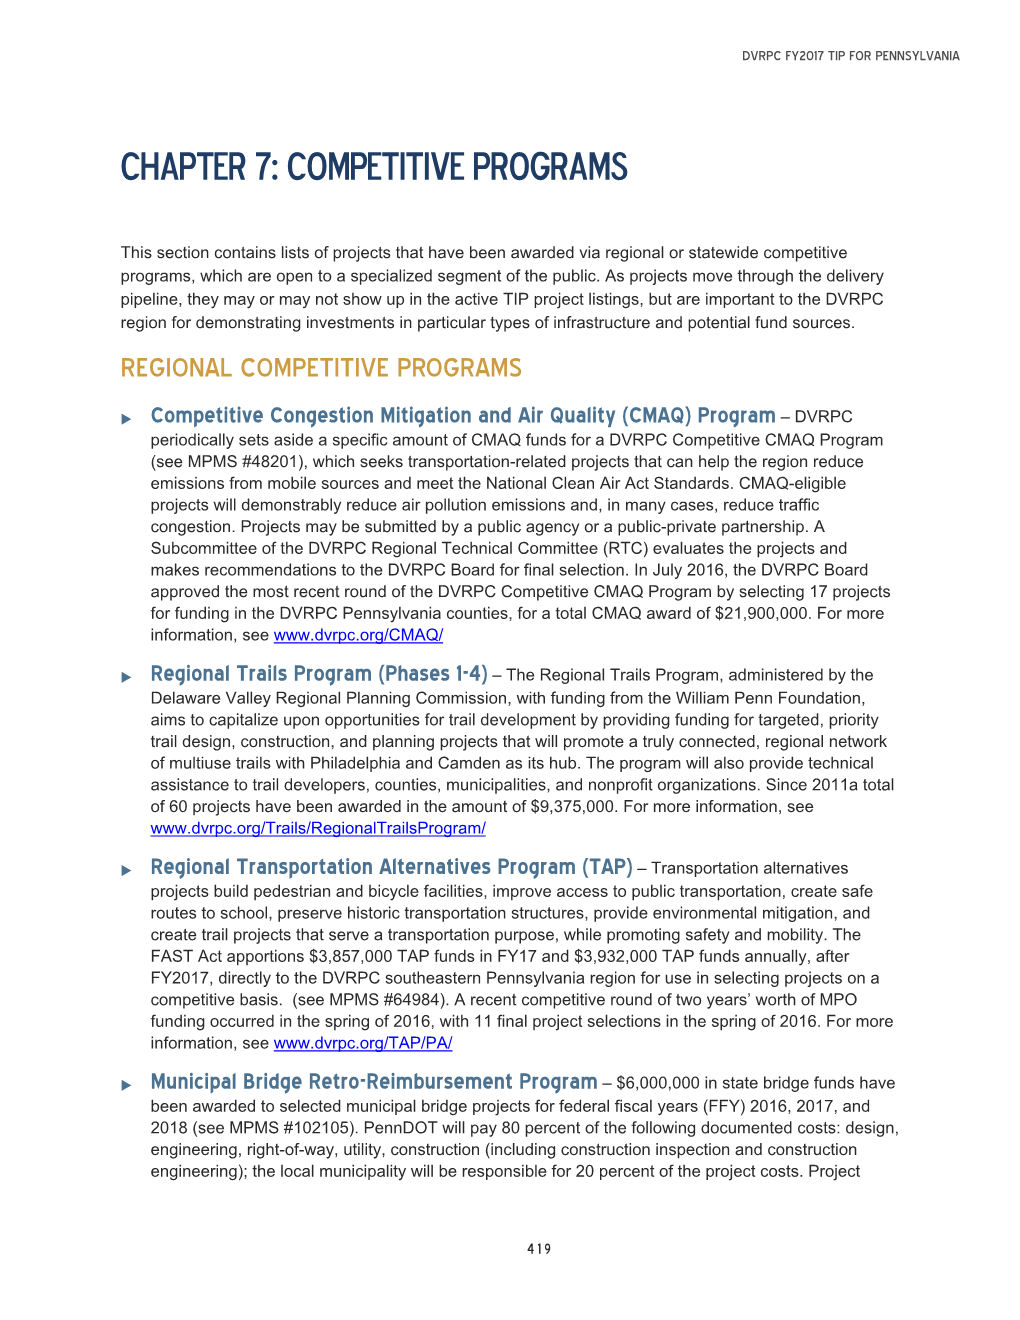 Competitive Programs